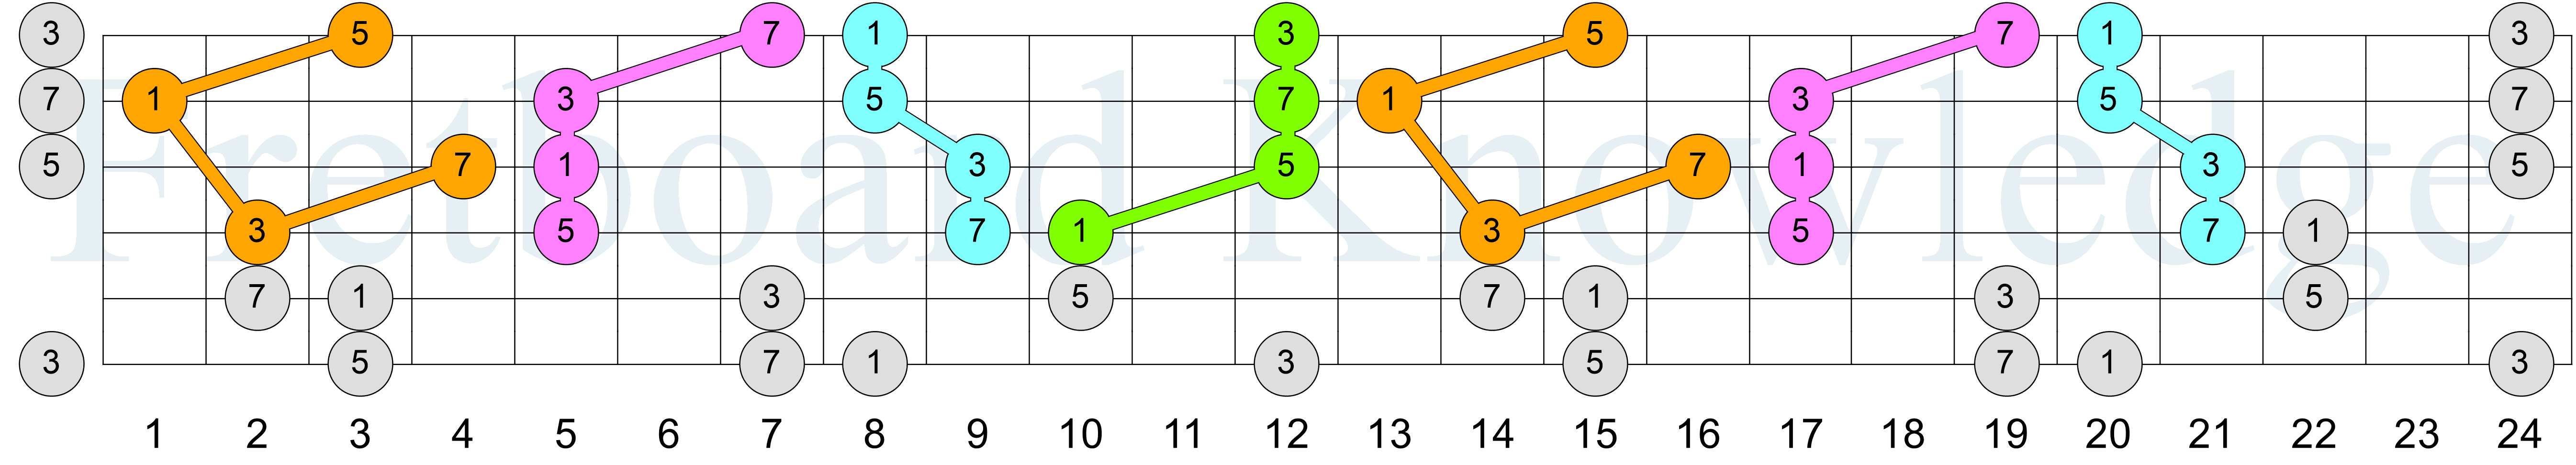 Cmaj7 - Drop 2 - Strings 1234 - Colored Connected